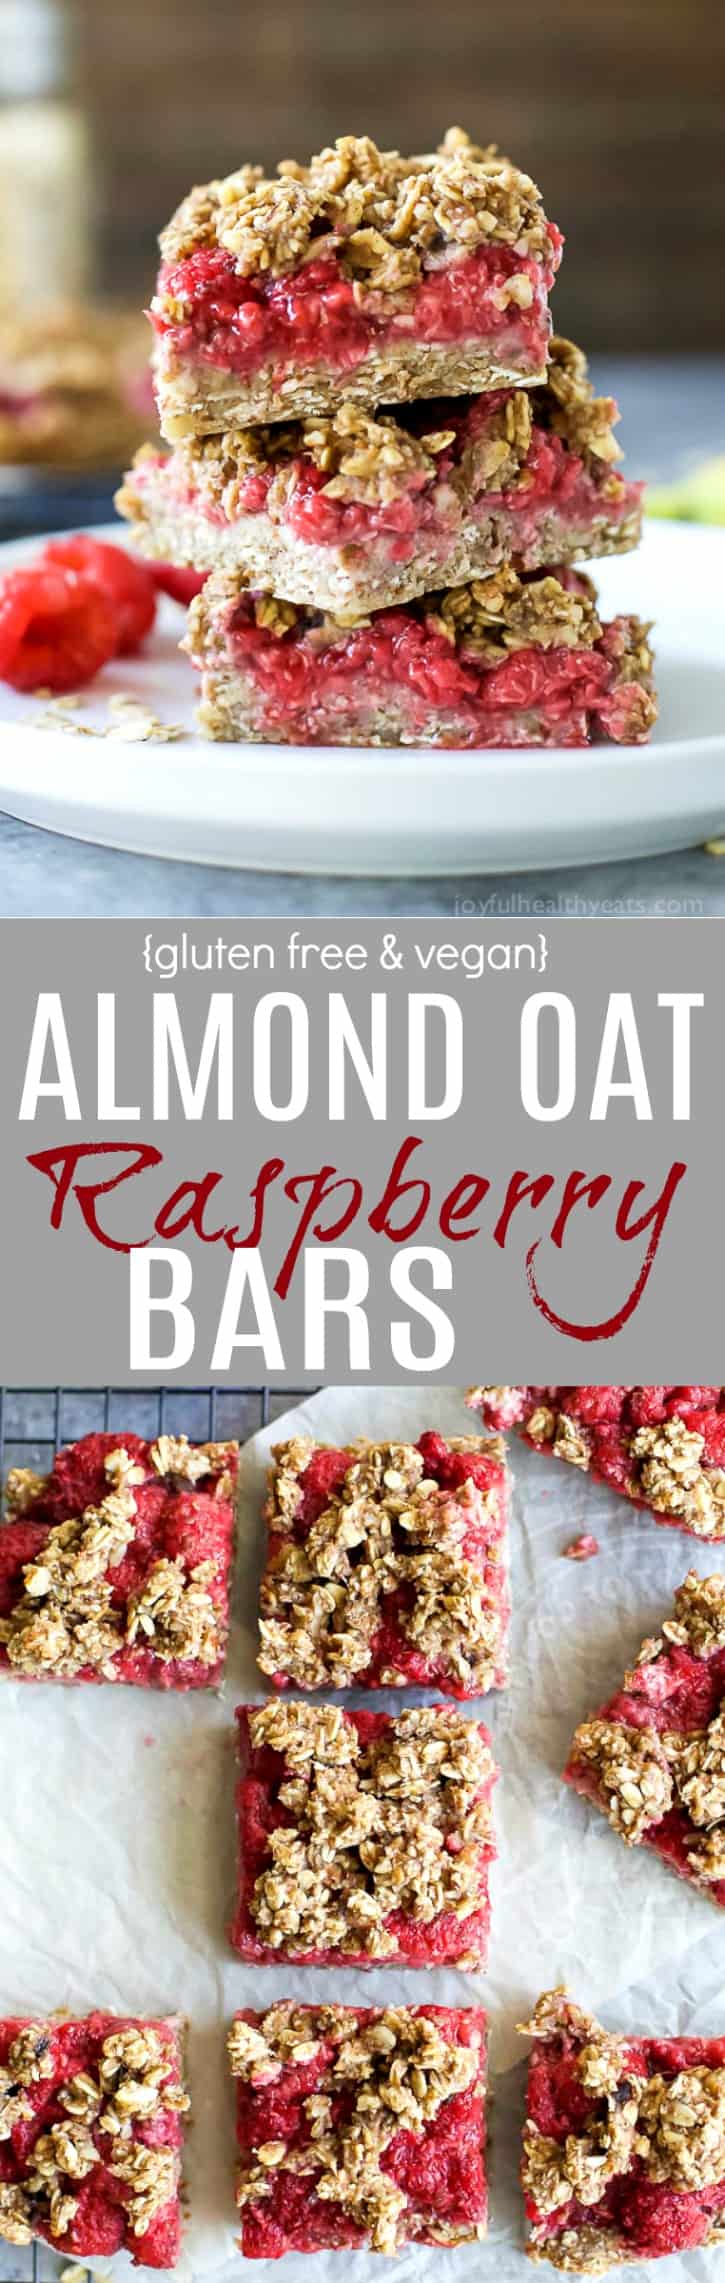 A Collage of Two Images of Almond Oat Raspberry Bars